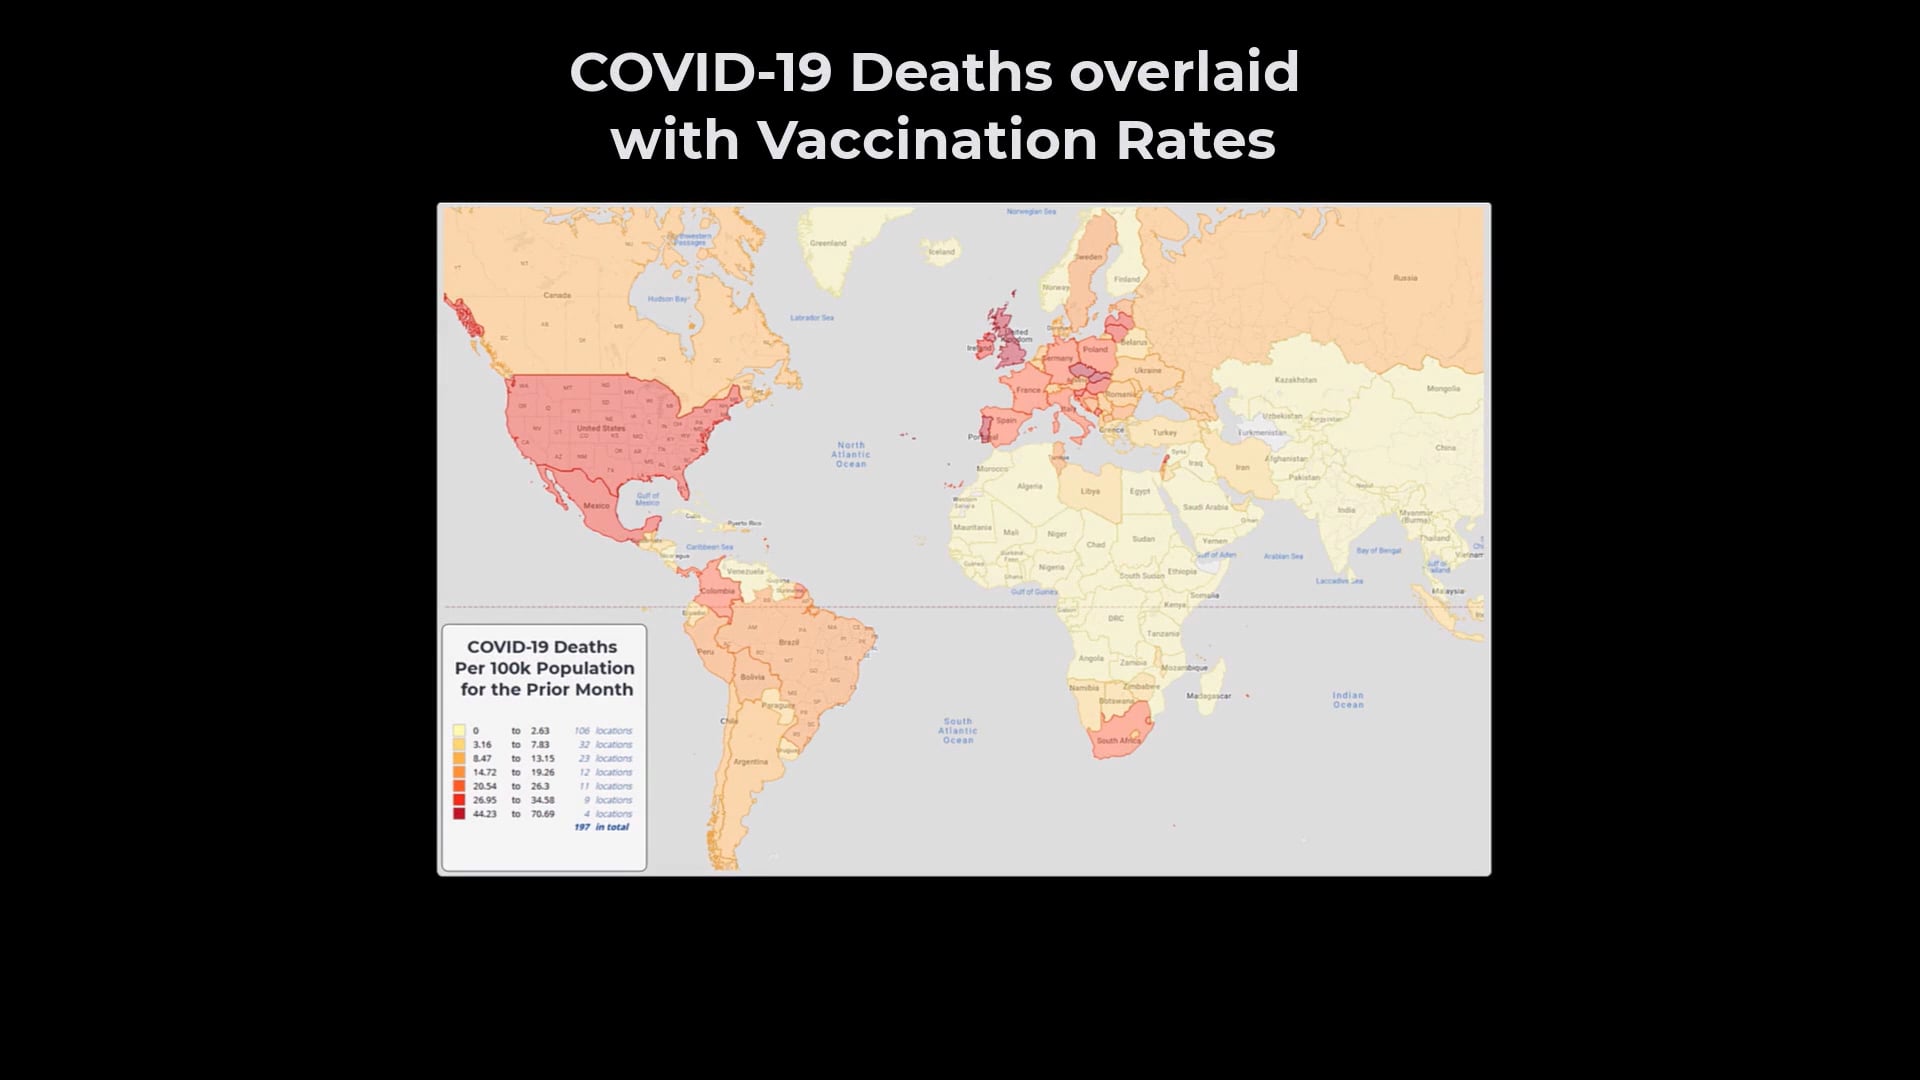 COVID-19 Deaths overlaid with Vaccination Rates